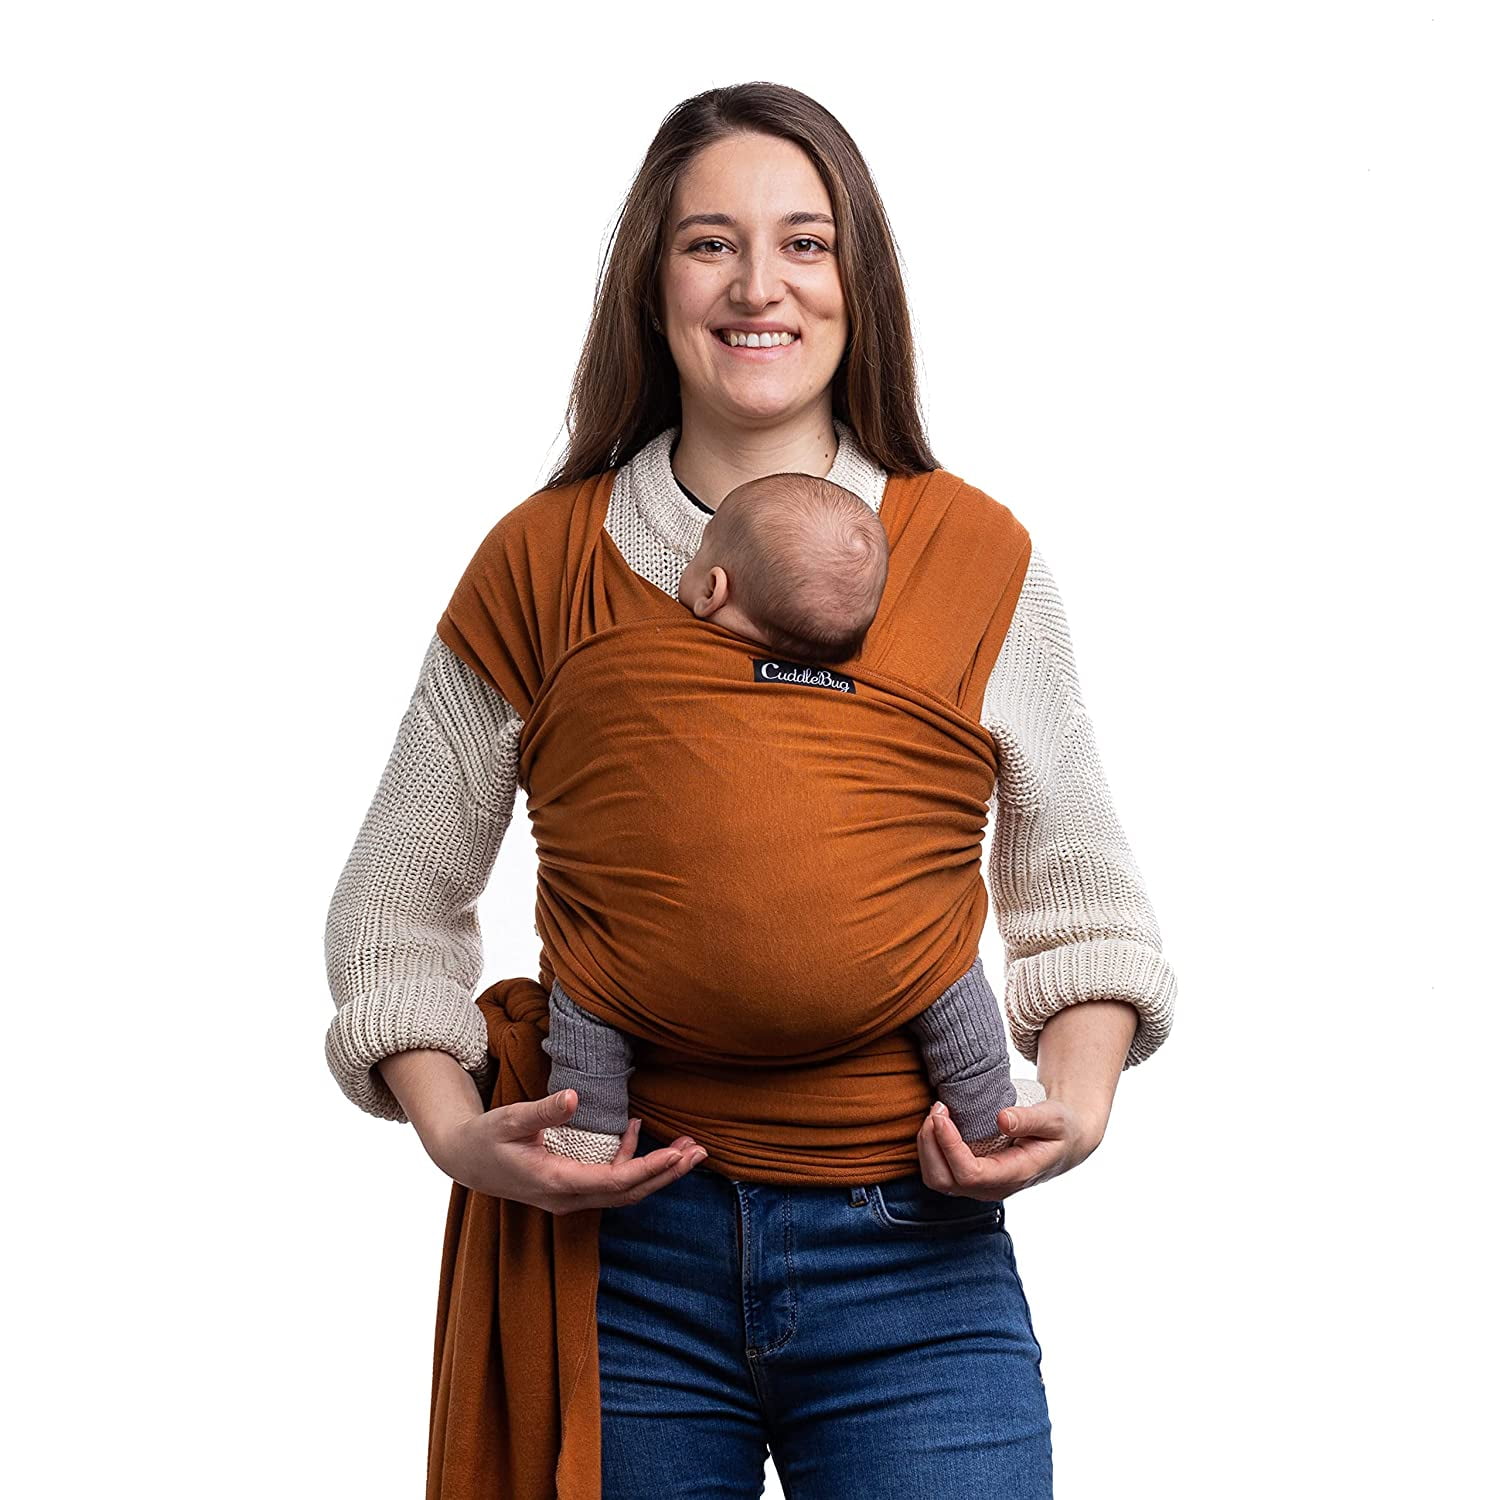  CuddleBug Baby Wrap - Hands-Free Baby Carrier Wrap - Soft &  Stretchy Baby Wraps Carrier - Baby Carrier Newborn to Toddler 7-35 lbs -  One-Size-Fits-All Baby Holder Wrap - Hip-Healthy